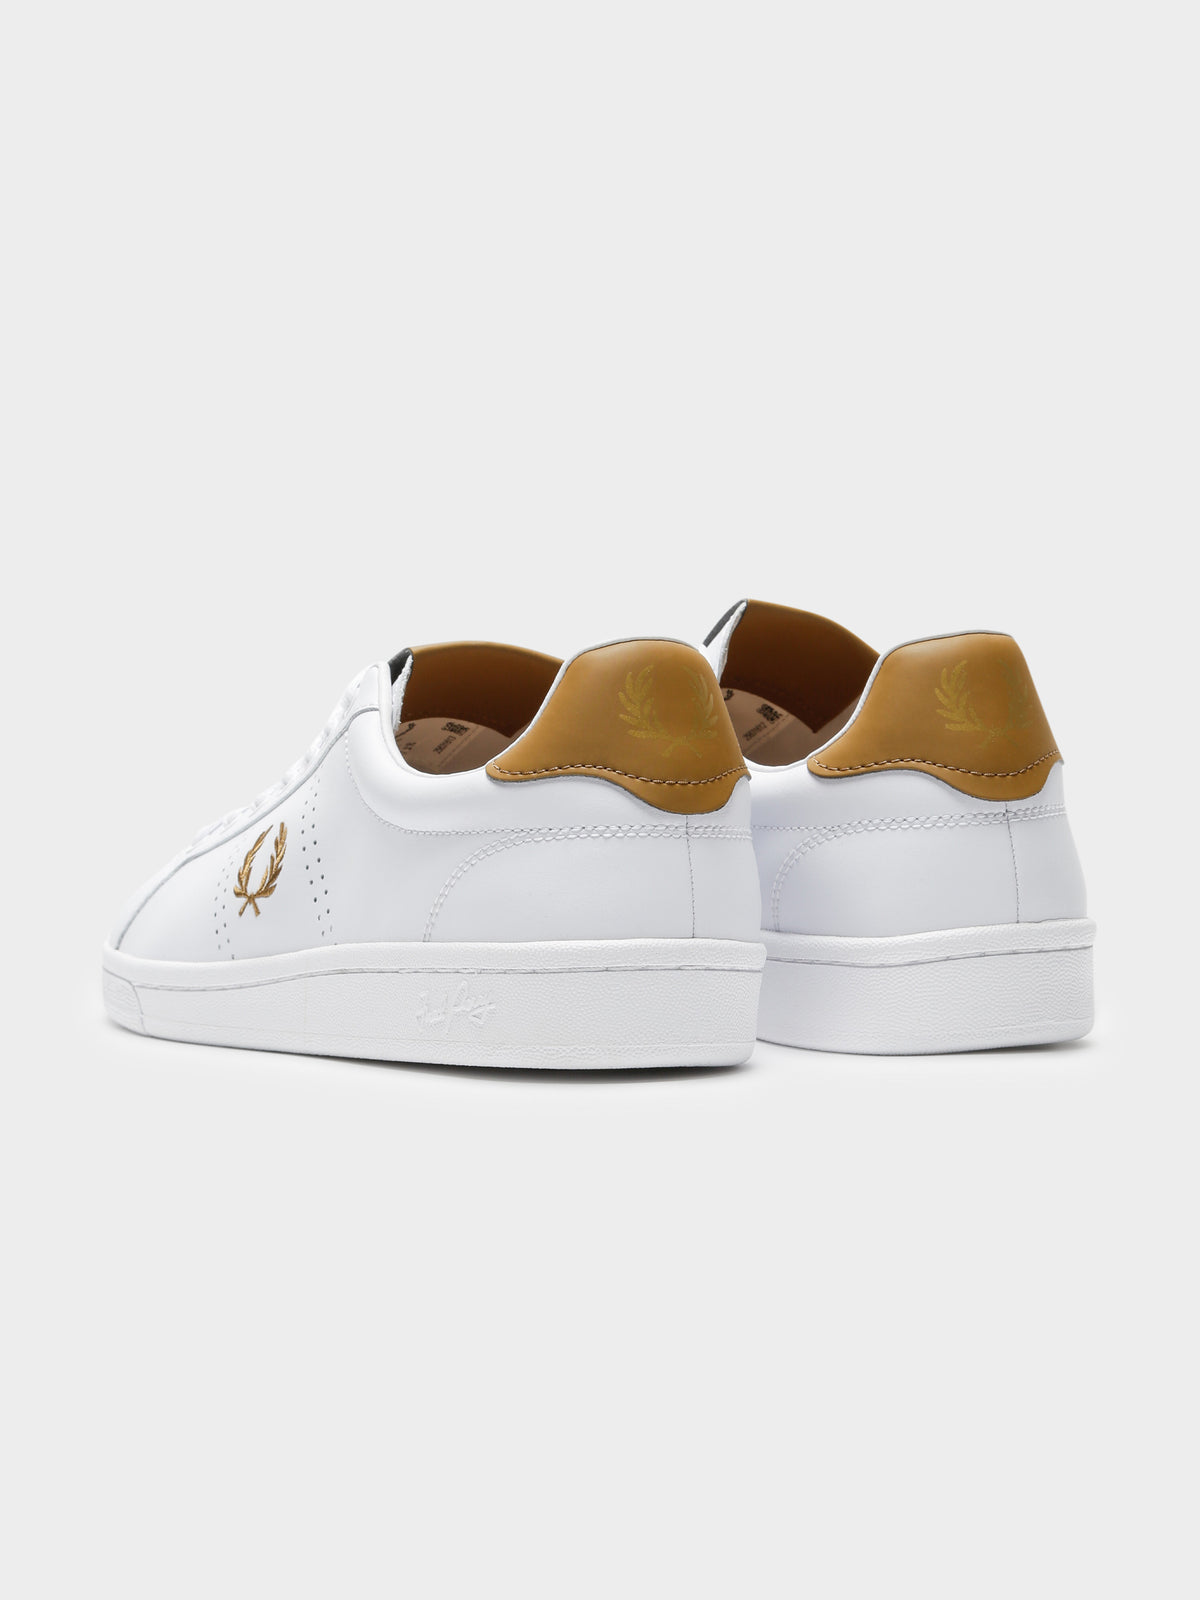 Mens B721 Leather Sneaker in White and Tan